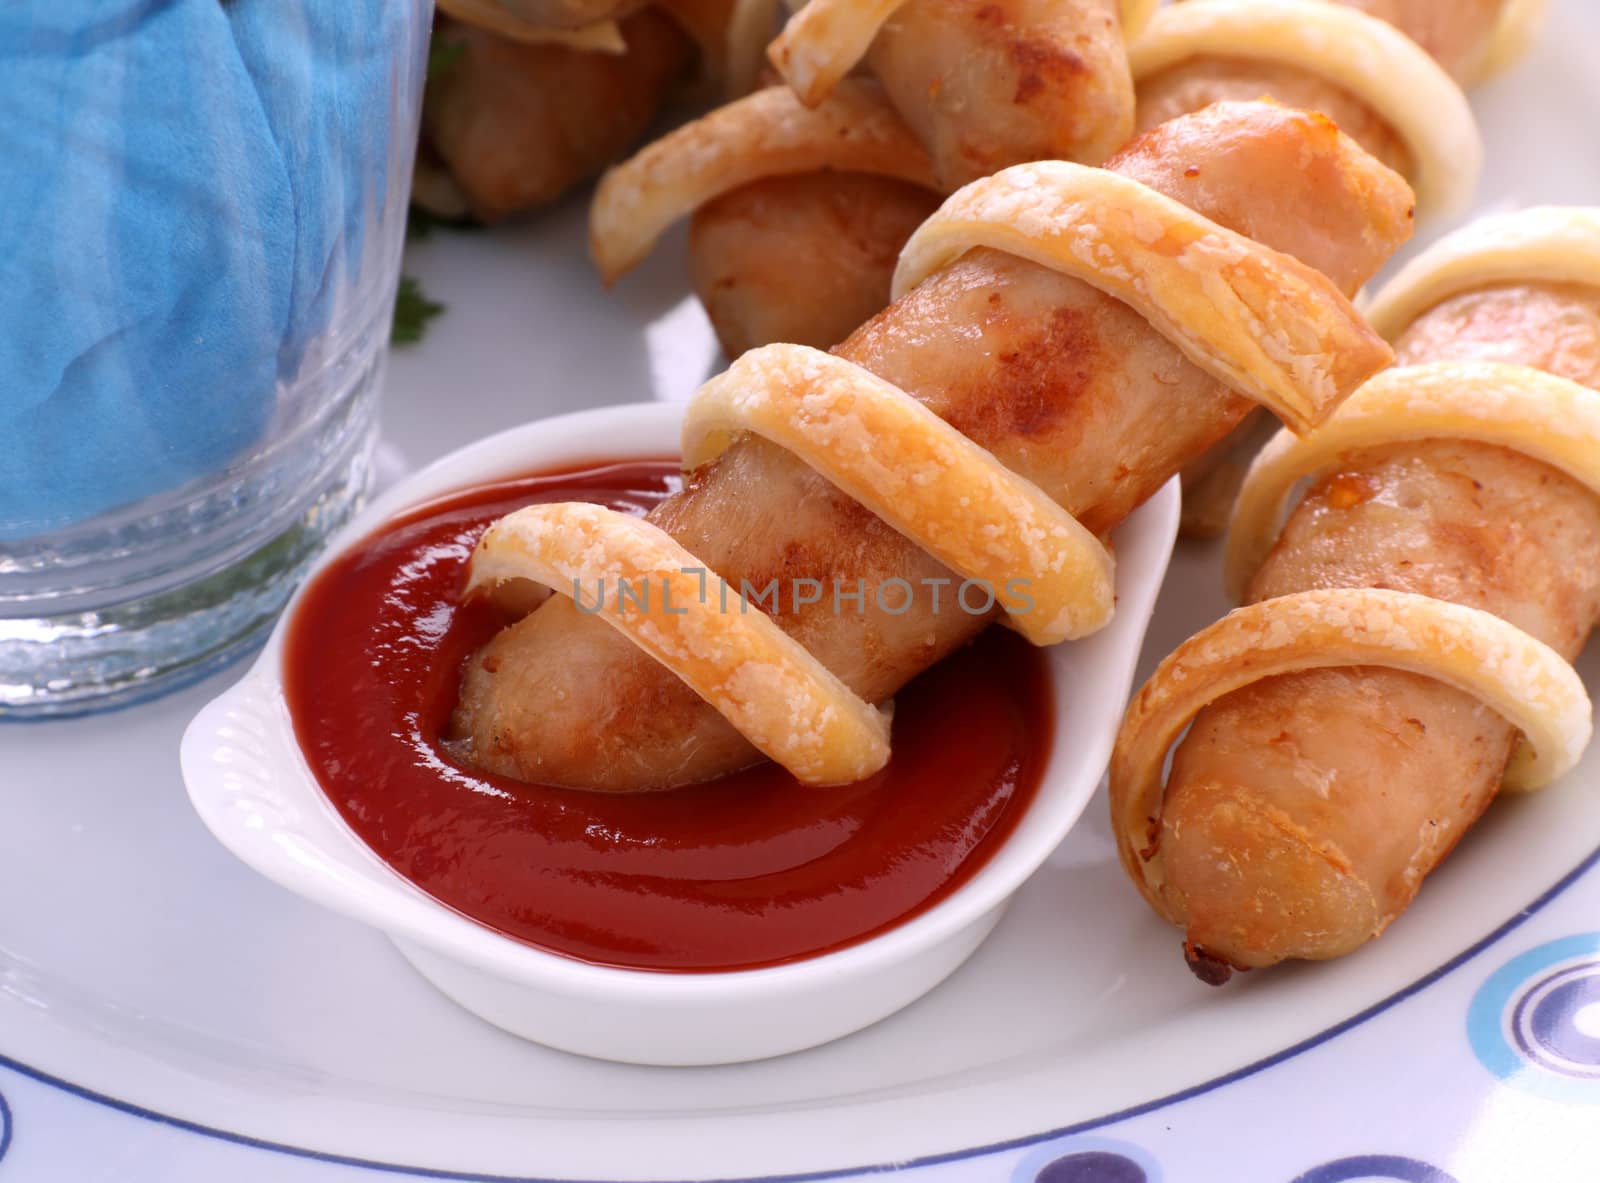 Twisted Pastry Sausages by jabiru